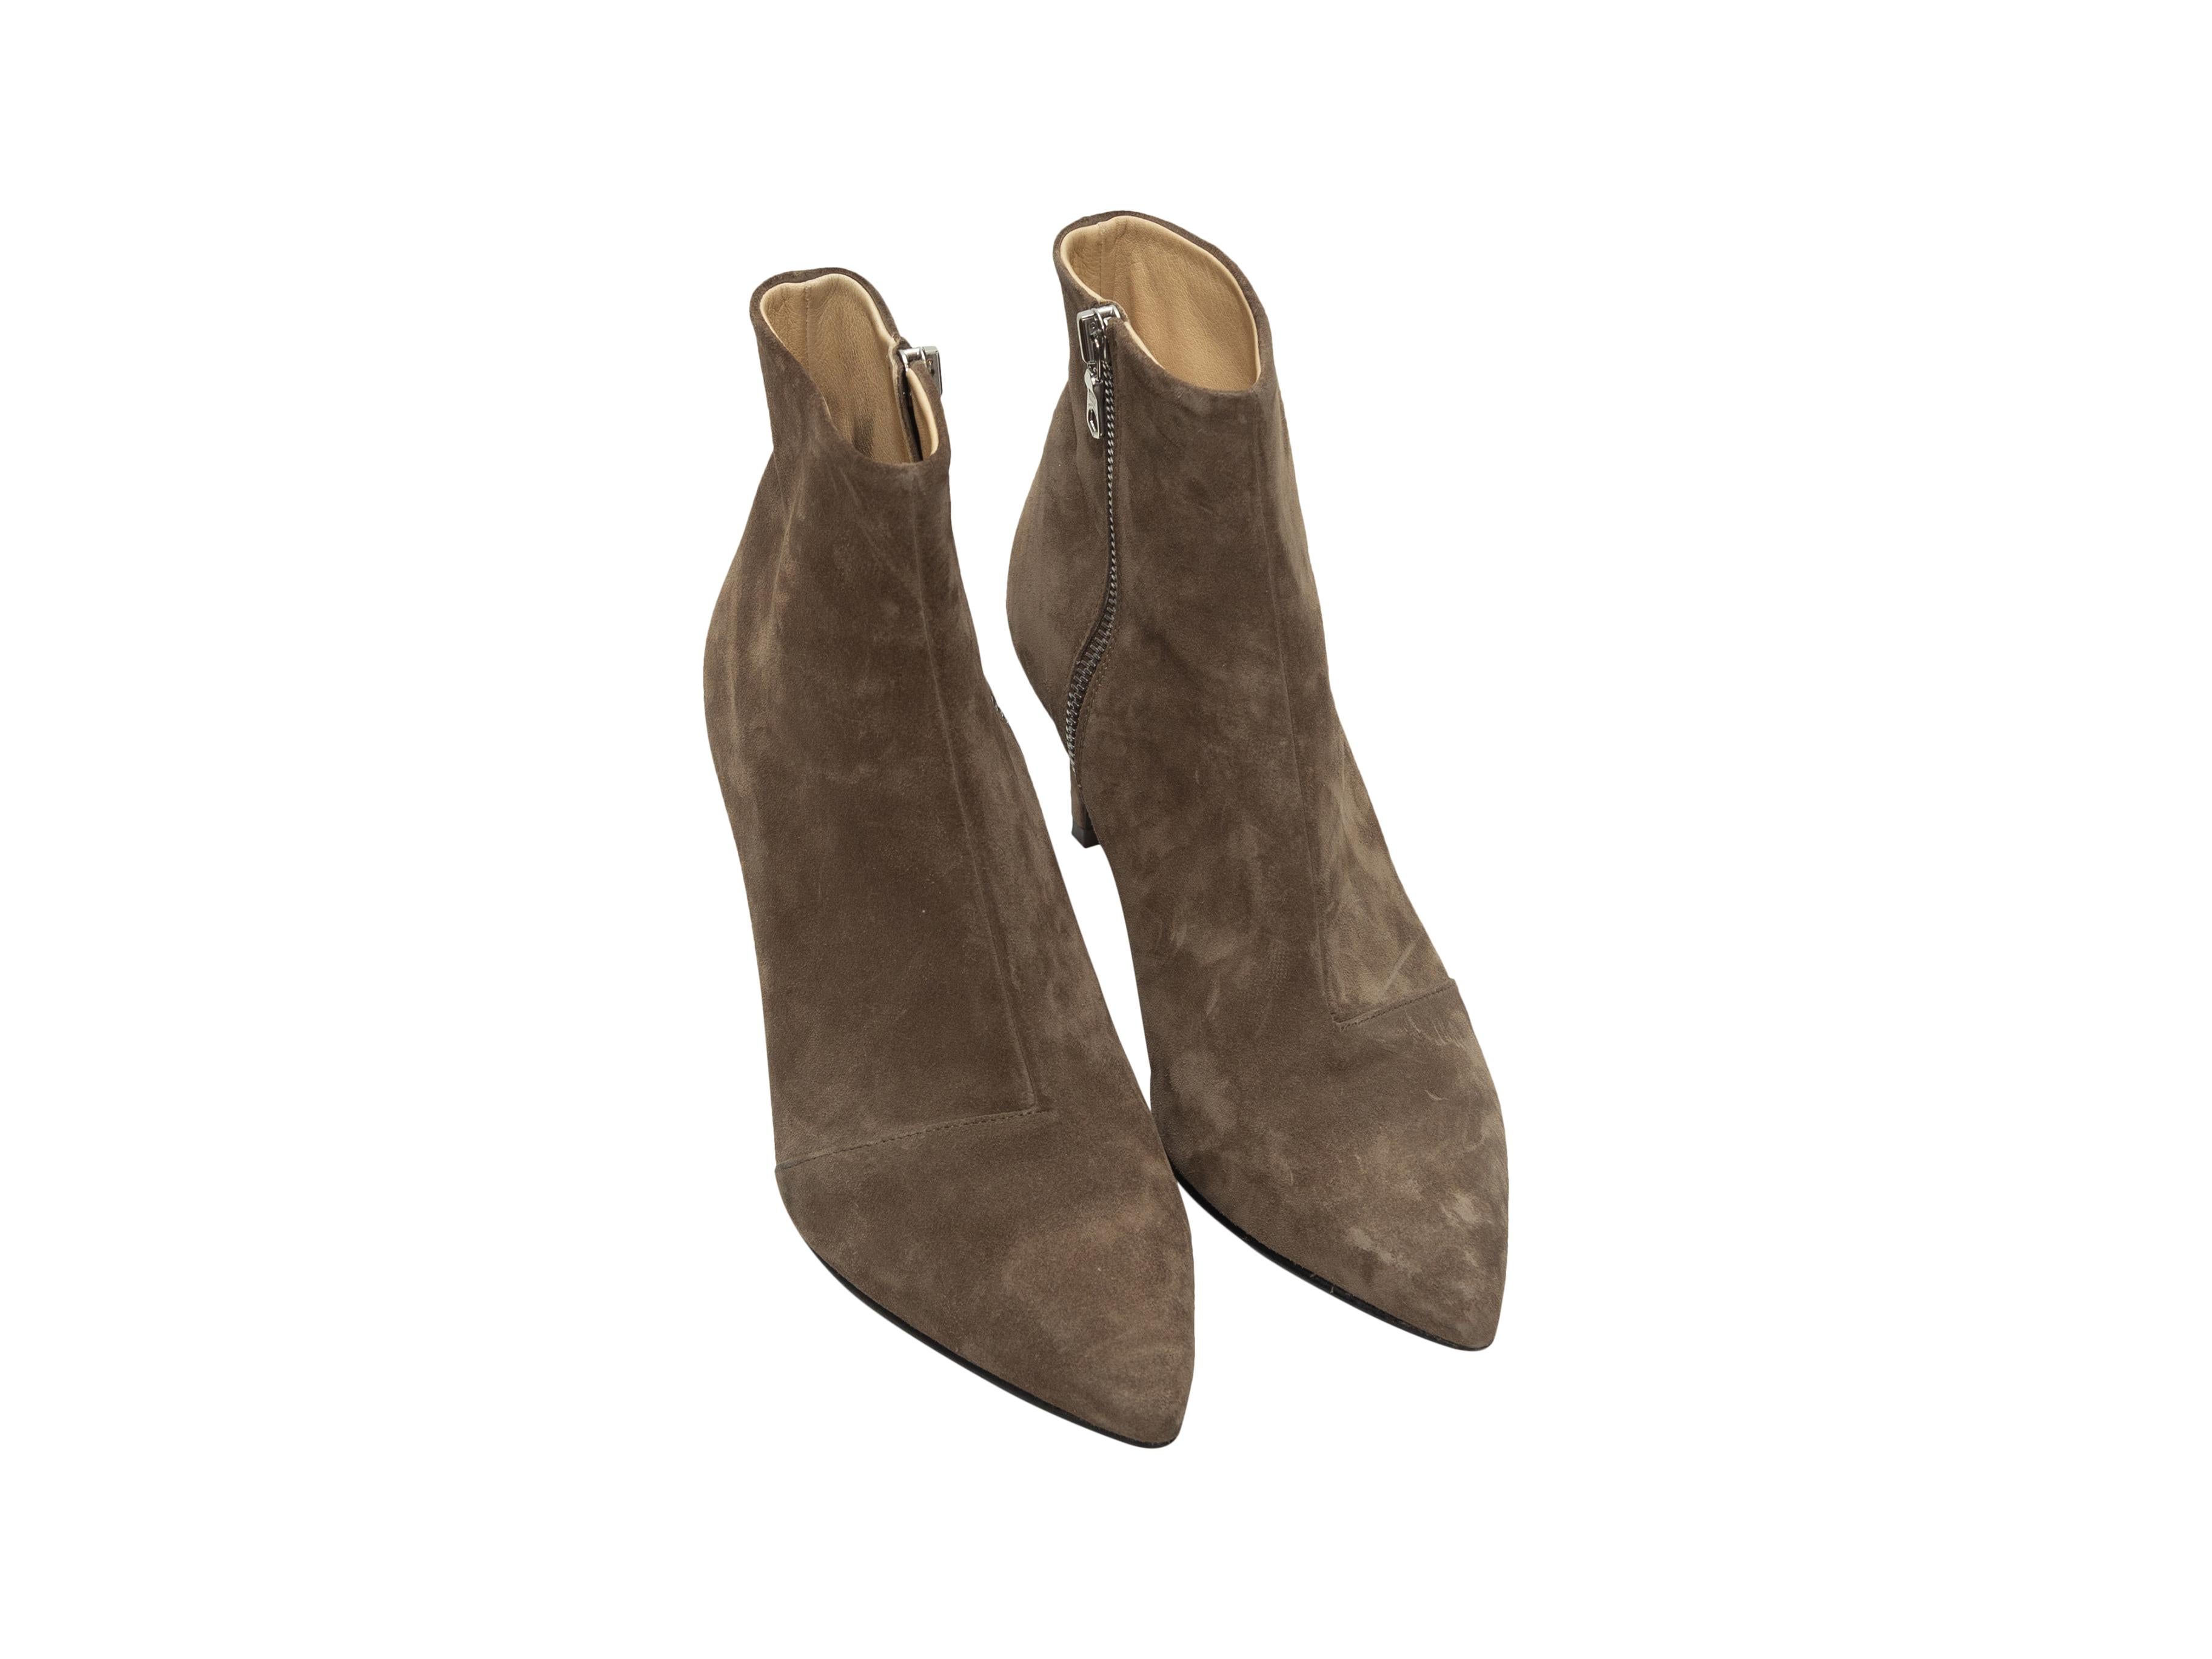 Product details: Tobacco suede pointed-toe booties by Rag & Bone. Zip closures at inner sides. Designer size 38.5. 3